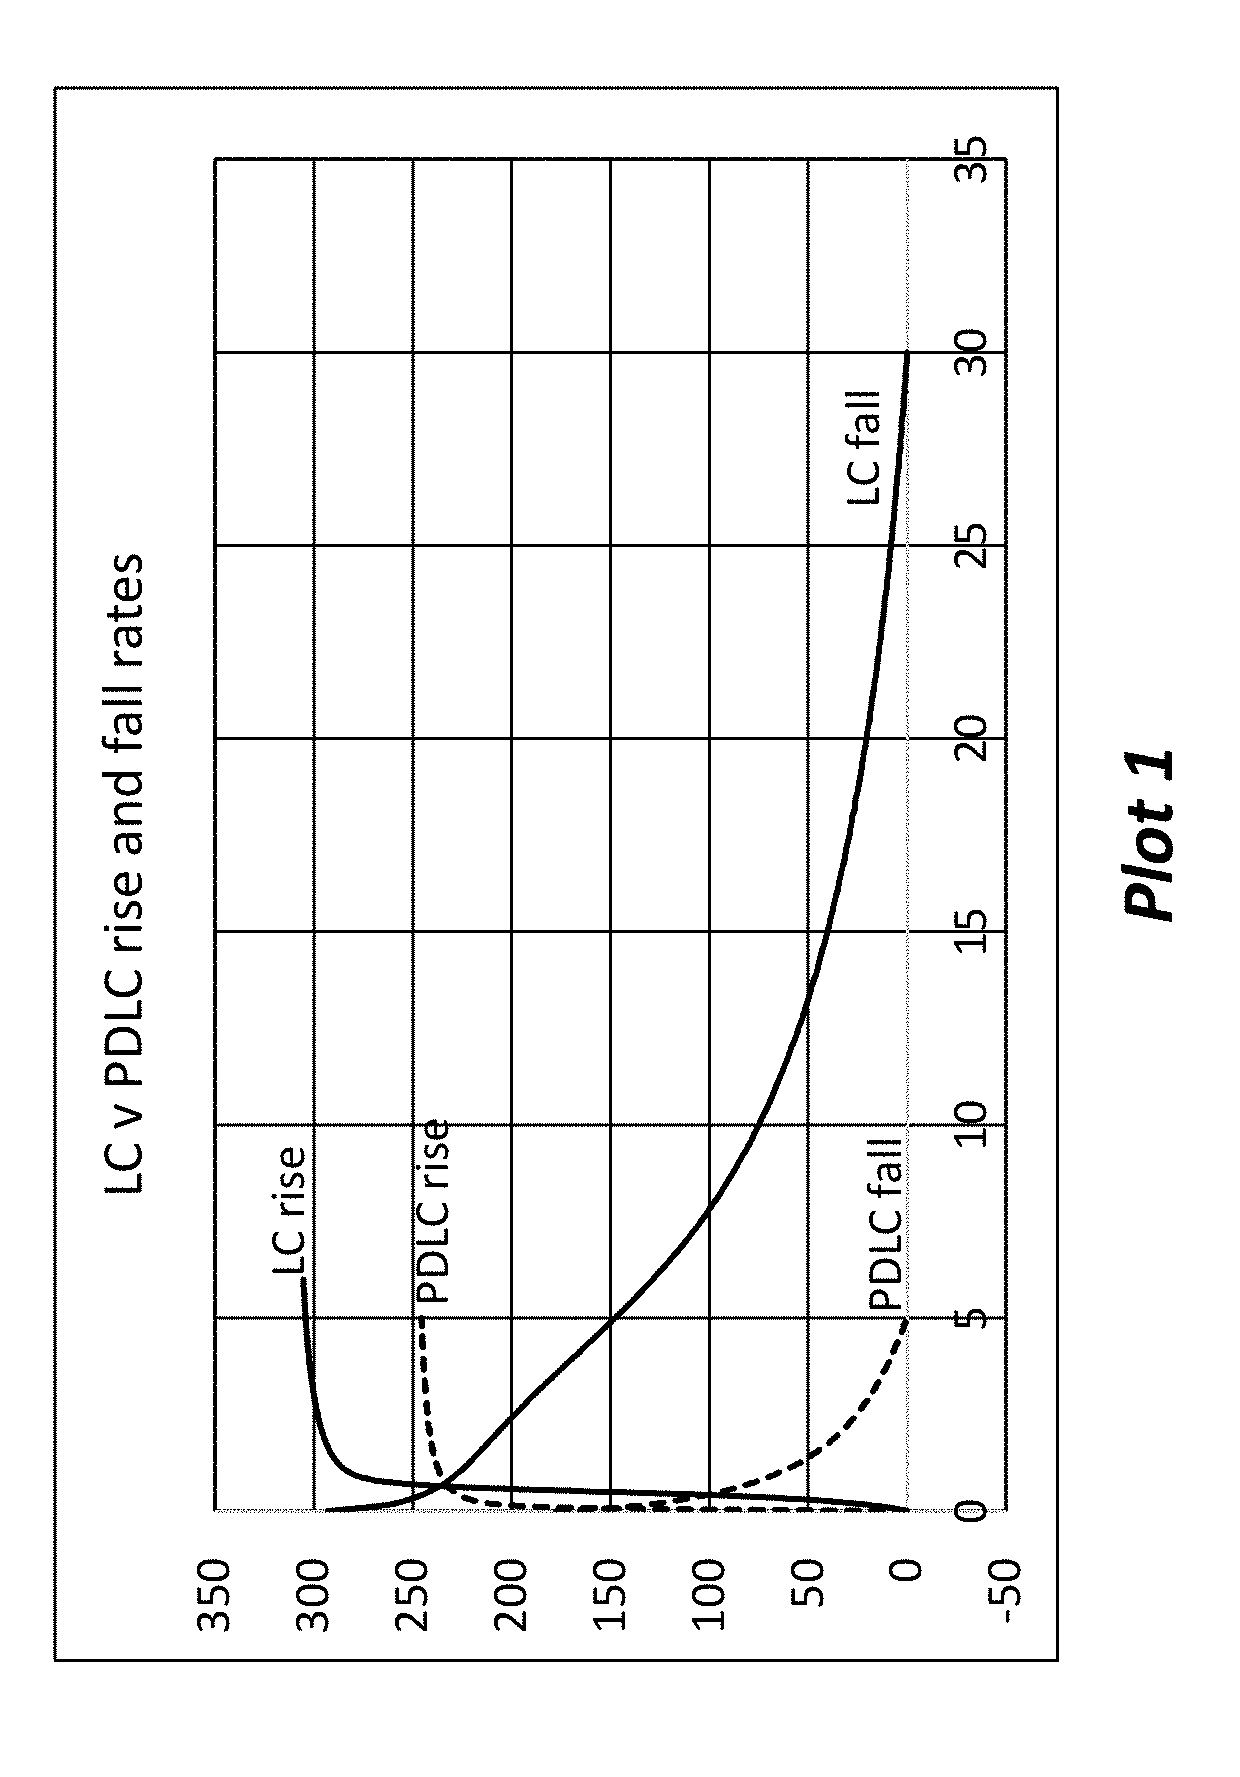 Polymer dispersed/shear aligned phase modulator device